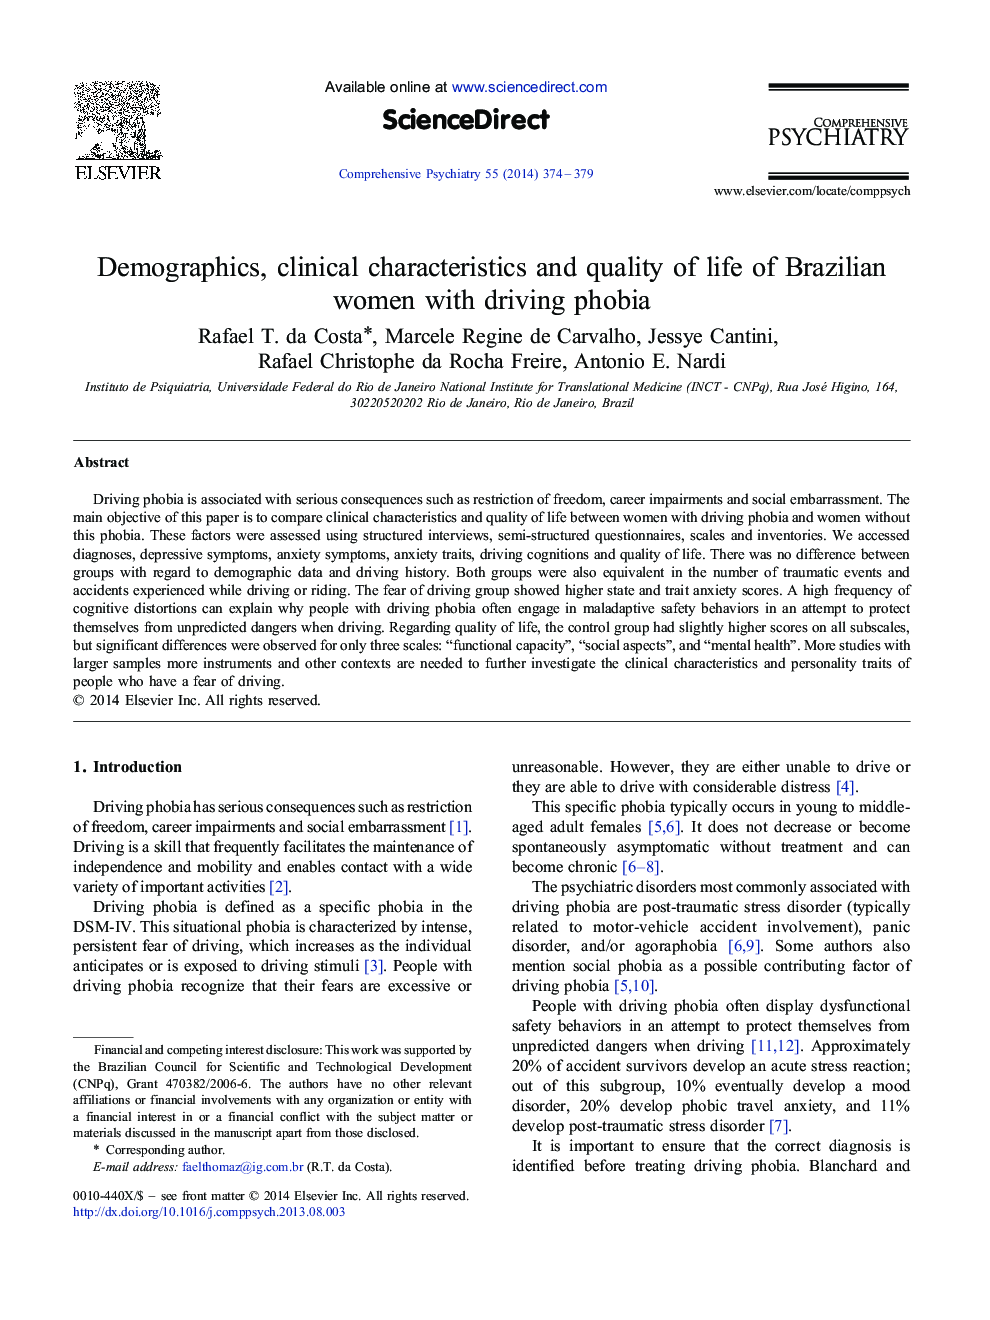 Demographics, clinical characteristics and quality of life of Brazilian women with driving phobia 